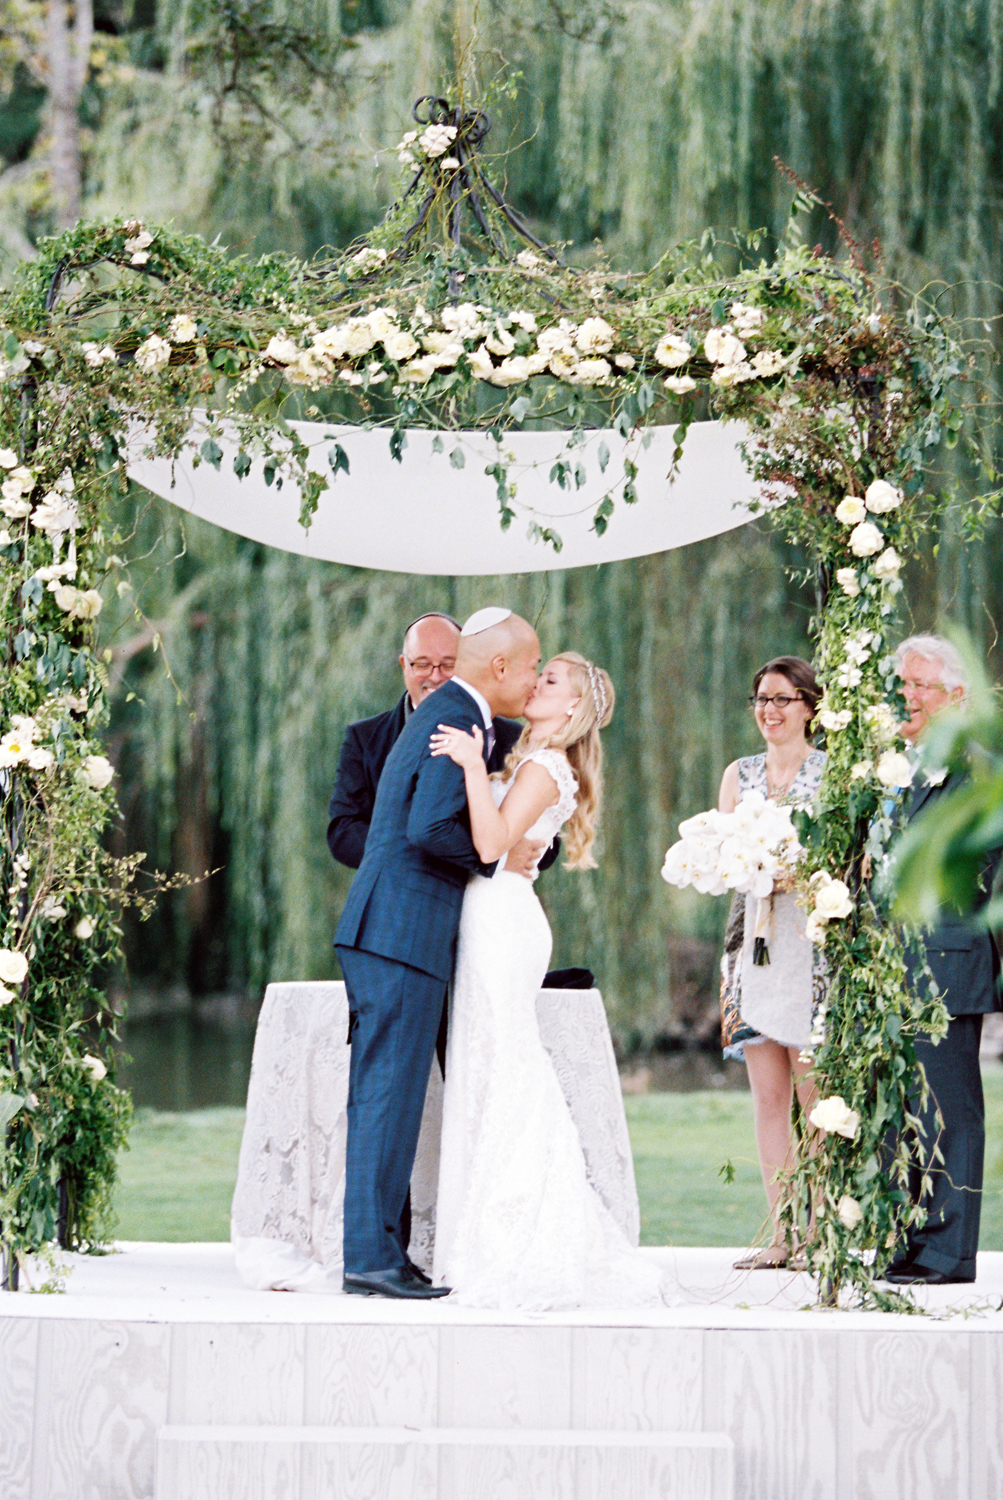 08-the-wedding-chuppah-looked-perfectly-elegant-with-greenery-and-white-flower-decor.jpg